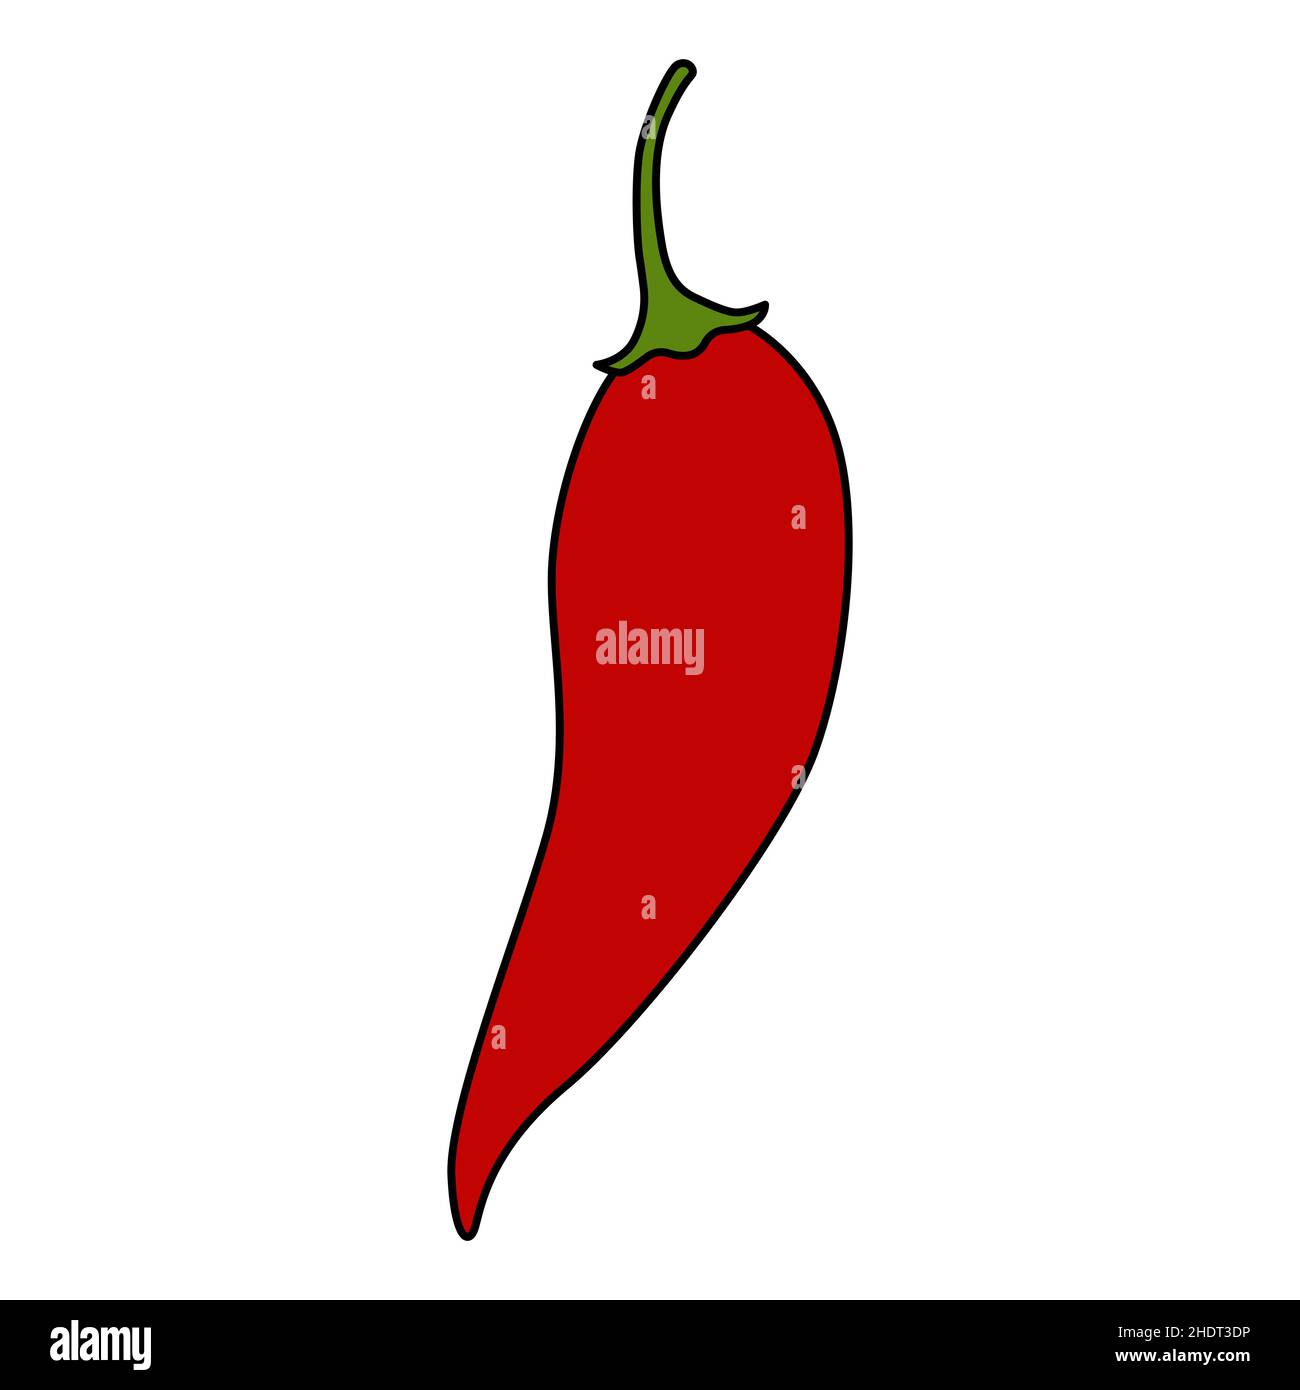 Cartoon pod of chili pepper. Colorful vector illustration isolated on white background Stock Vector